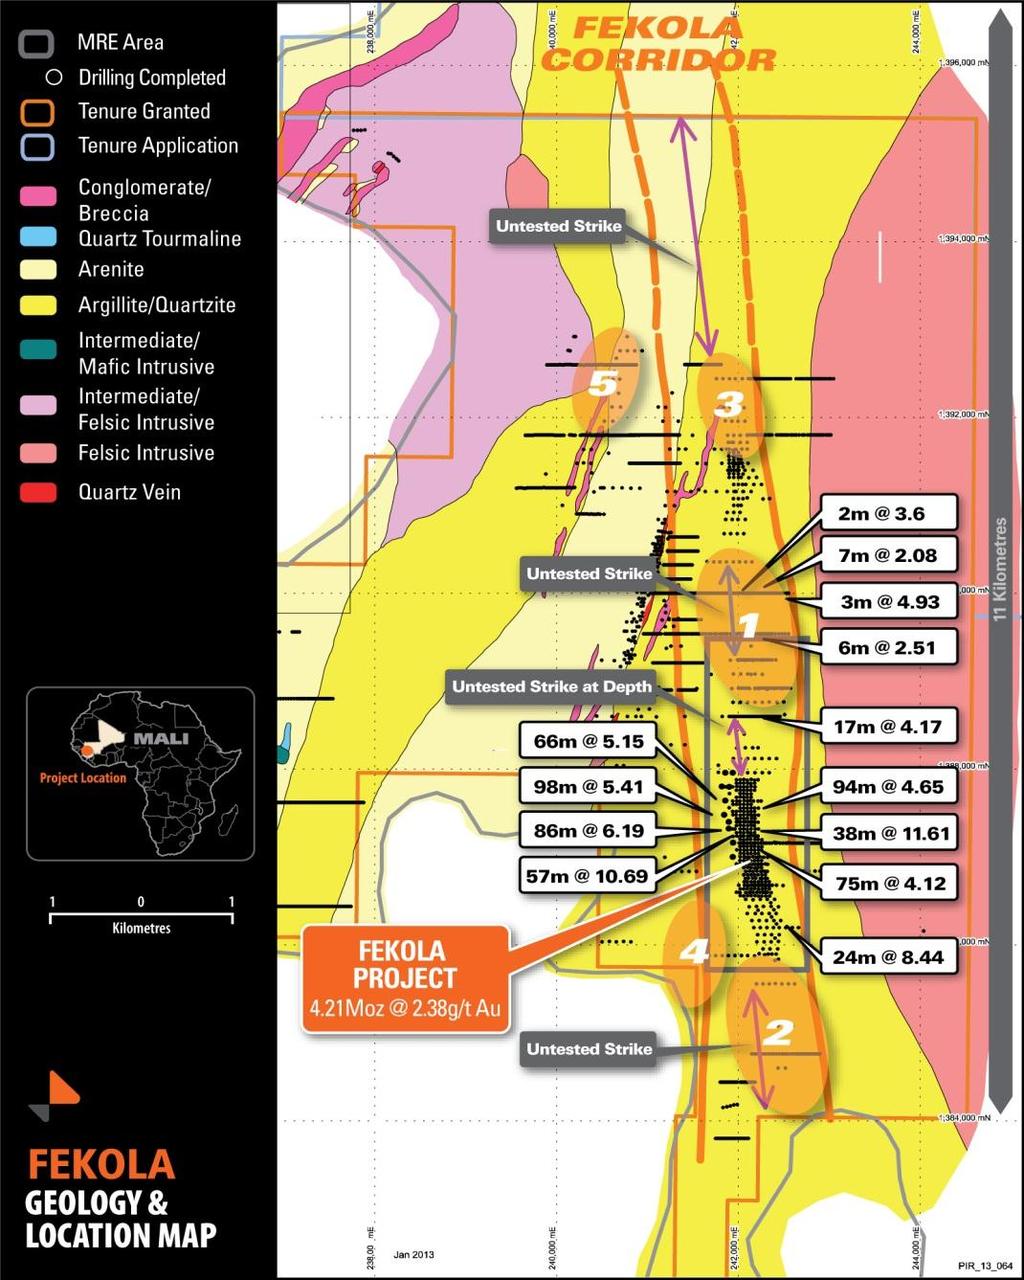 Fekola Project Significant Growth Potential Updated MRE of 4.21 Moz (@ 2.38 g/t) Based on drilling covering strike length of ~4km and to max.